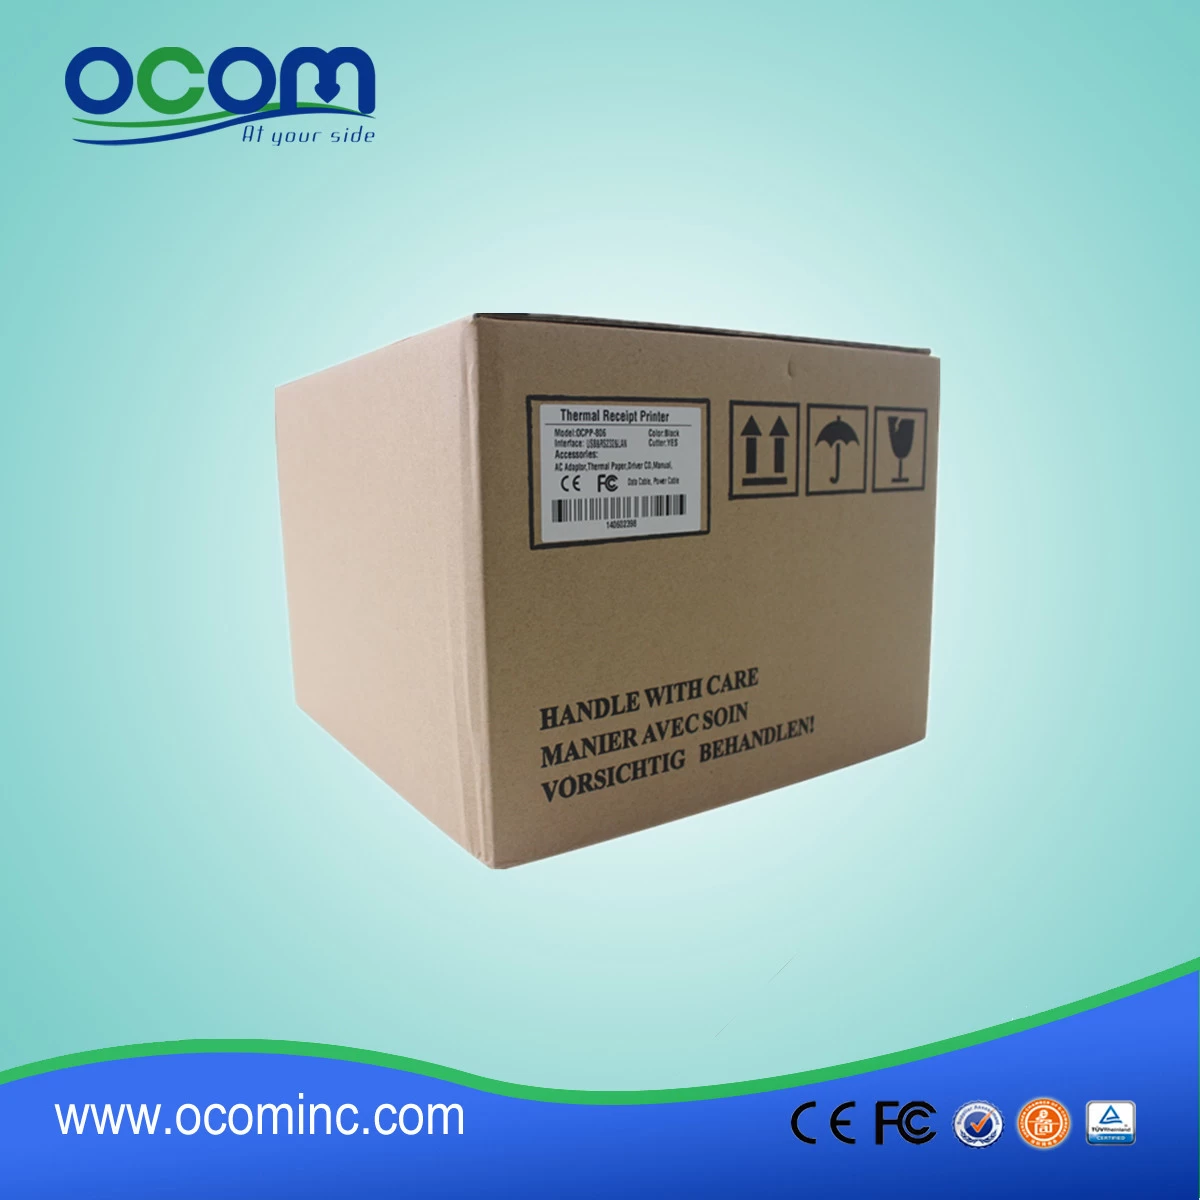 (OCPP-80N) 80mm thermal POS receipt printer with automatic cutter